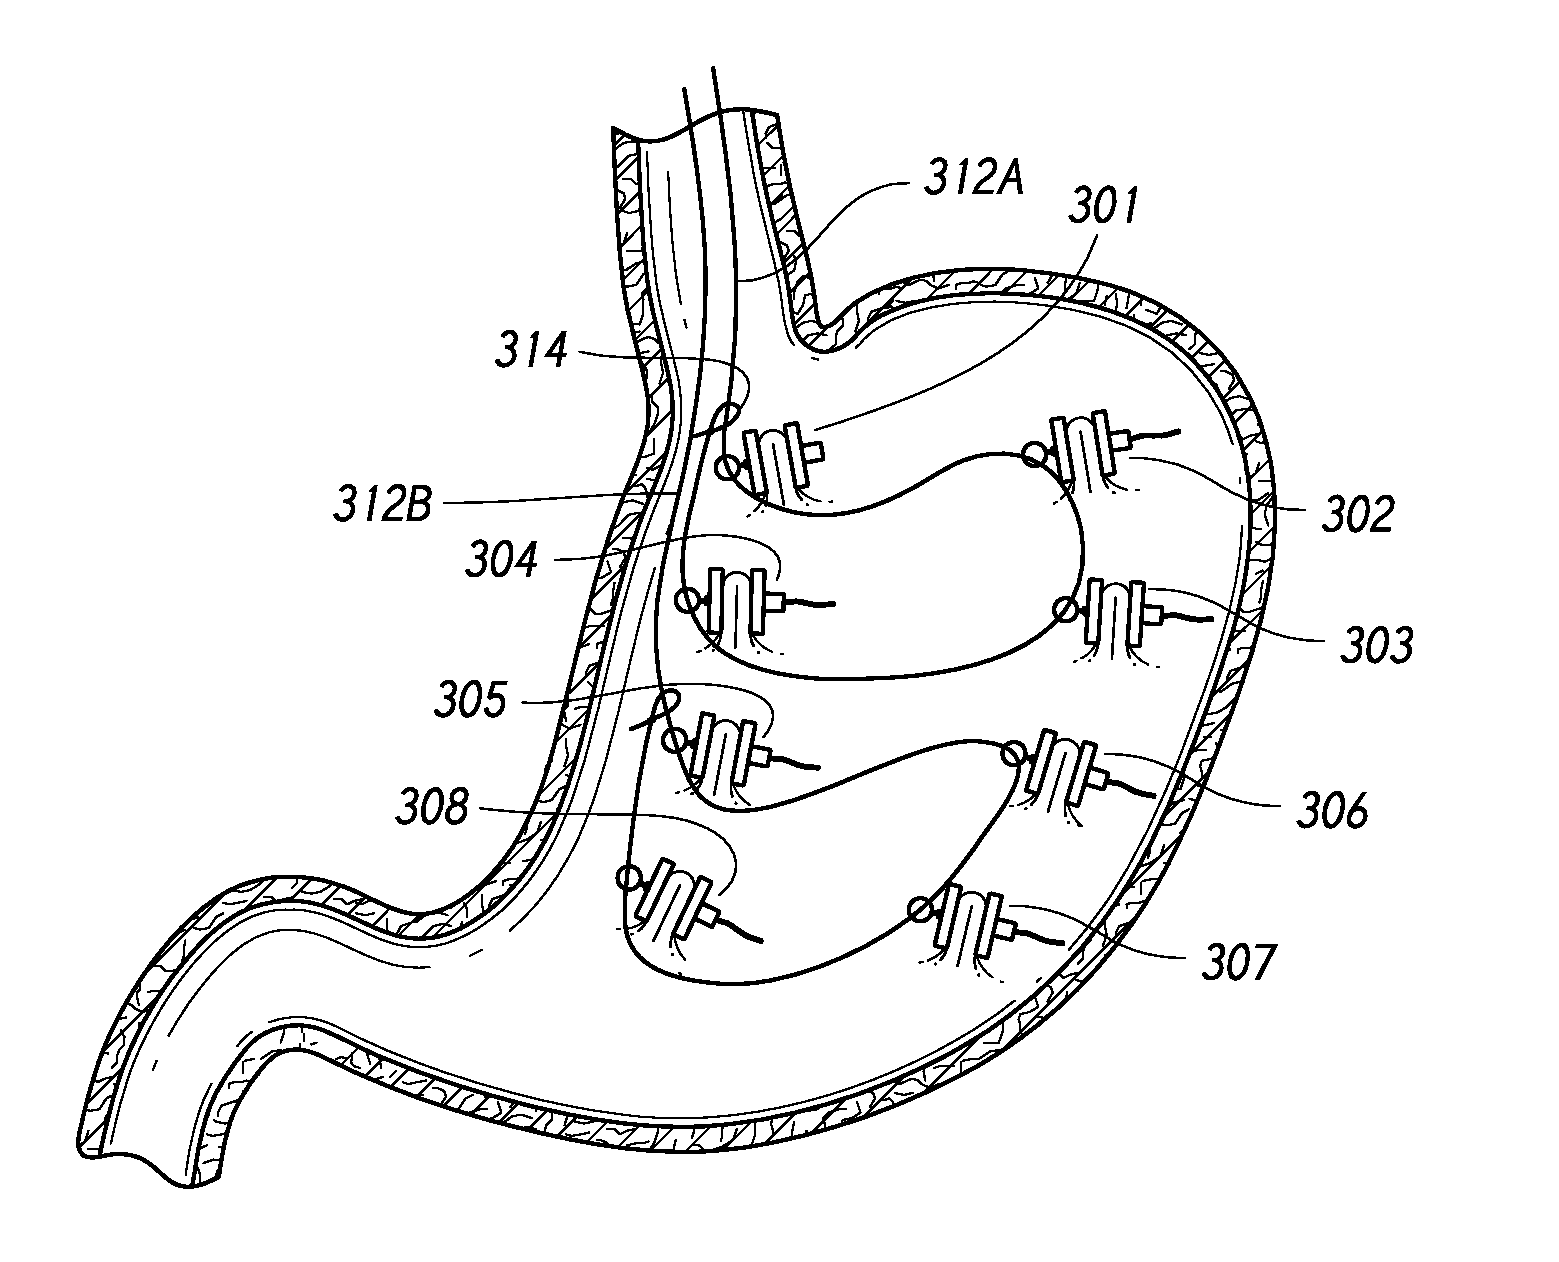 Devices and methods for the endolumenal treatment of obesity